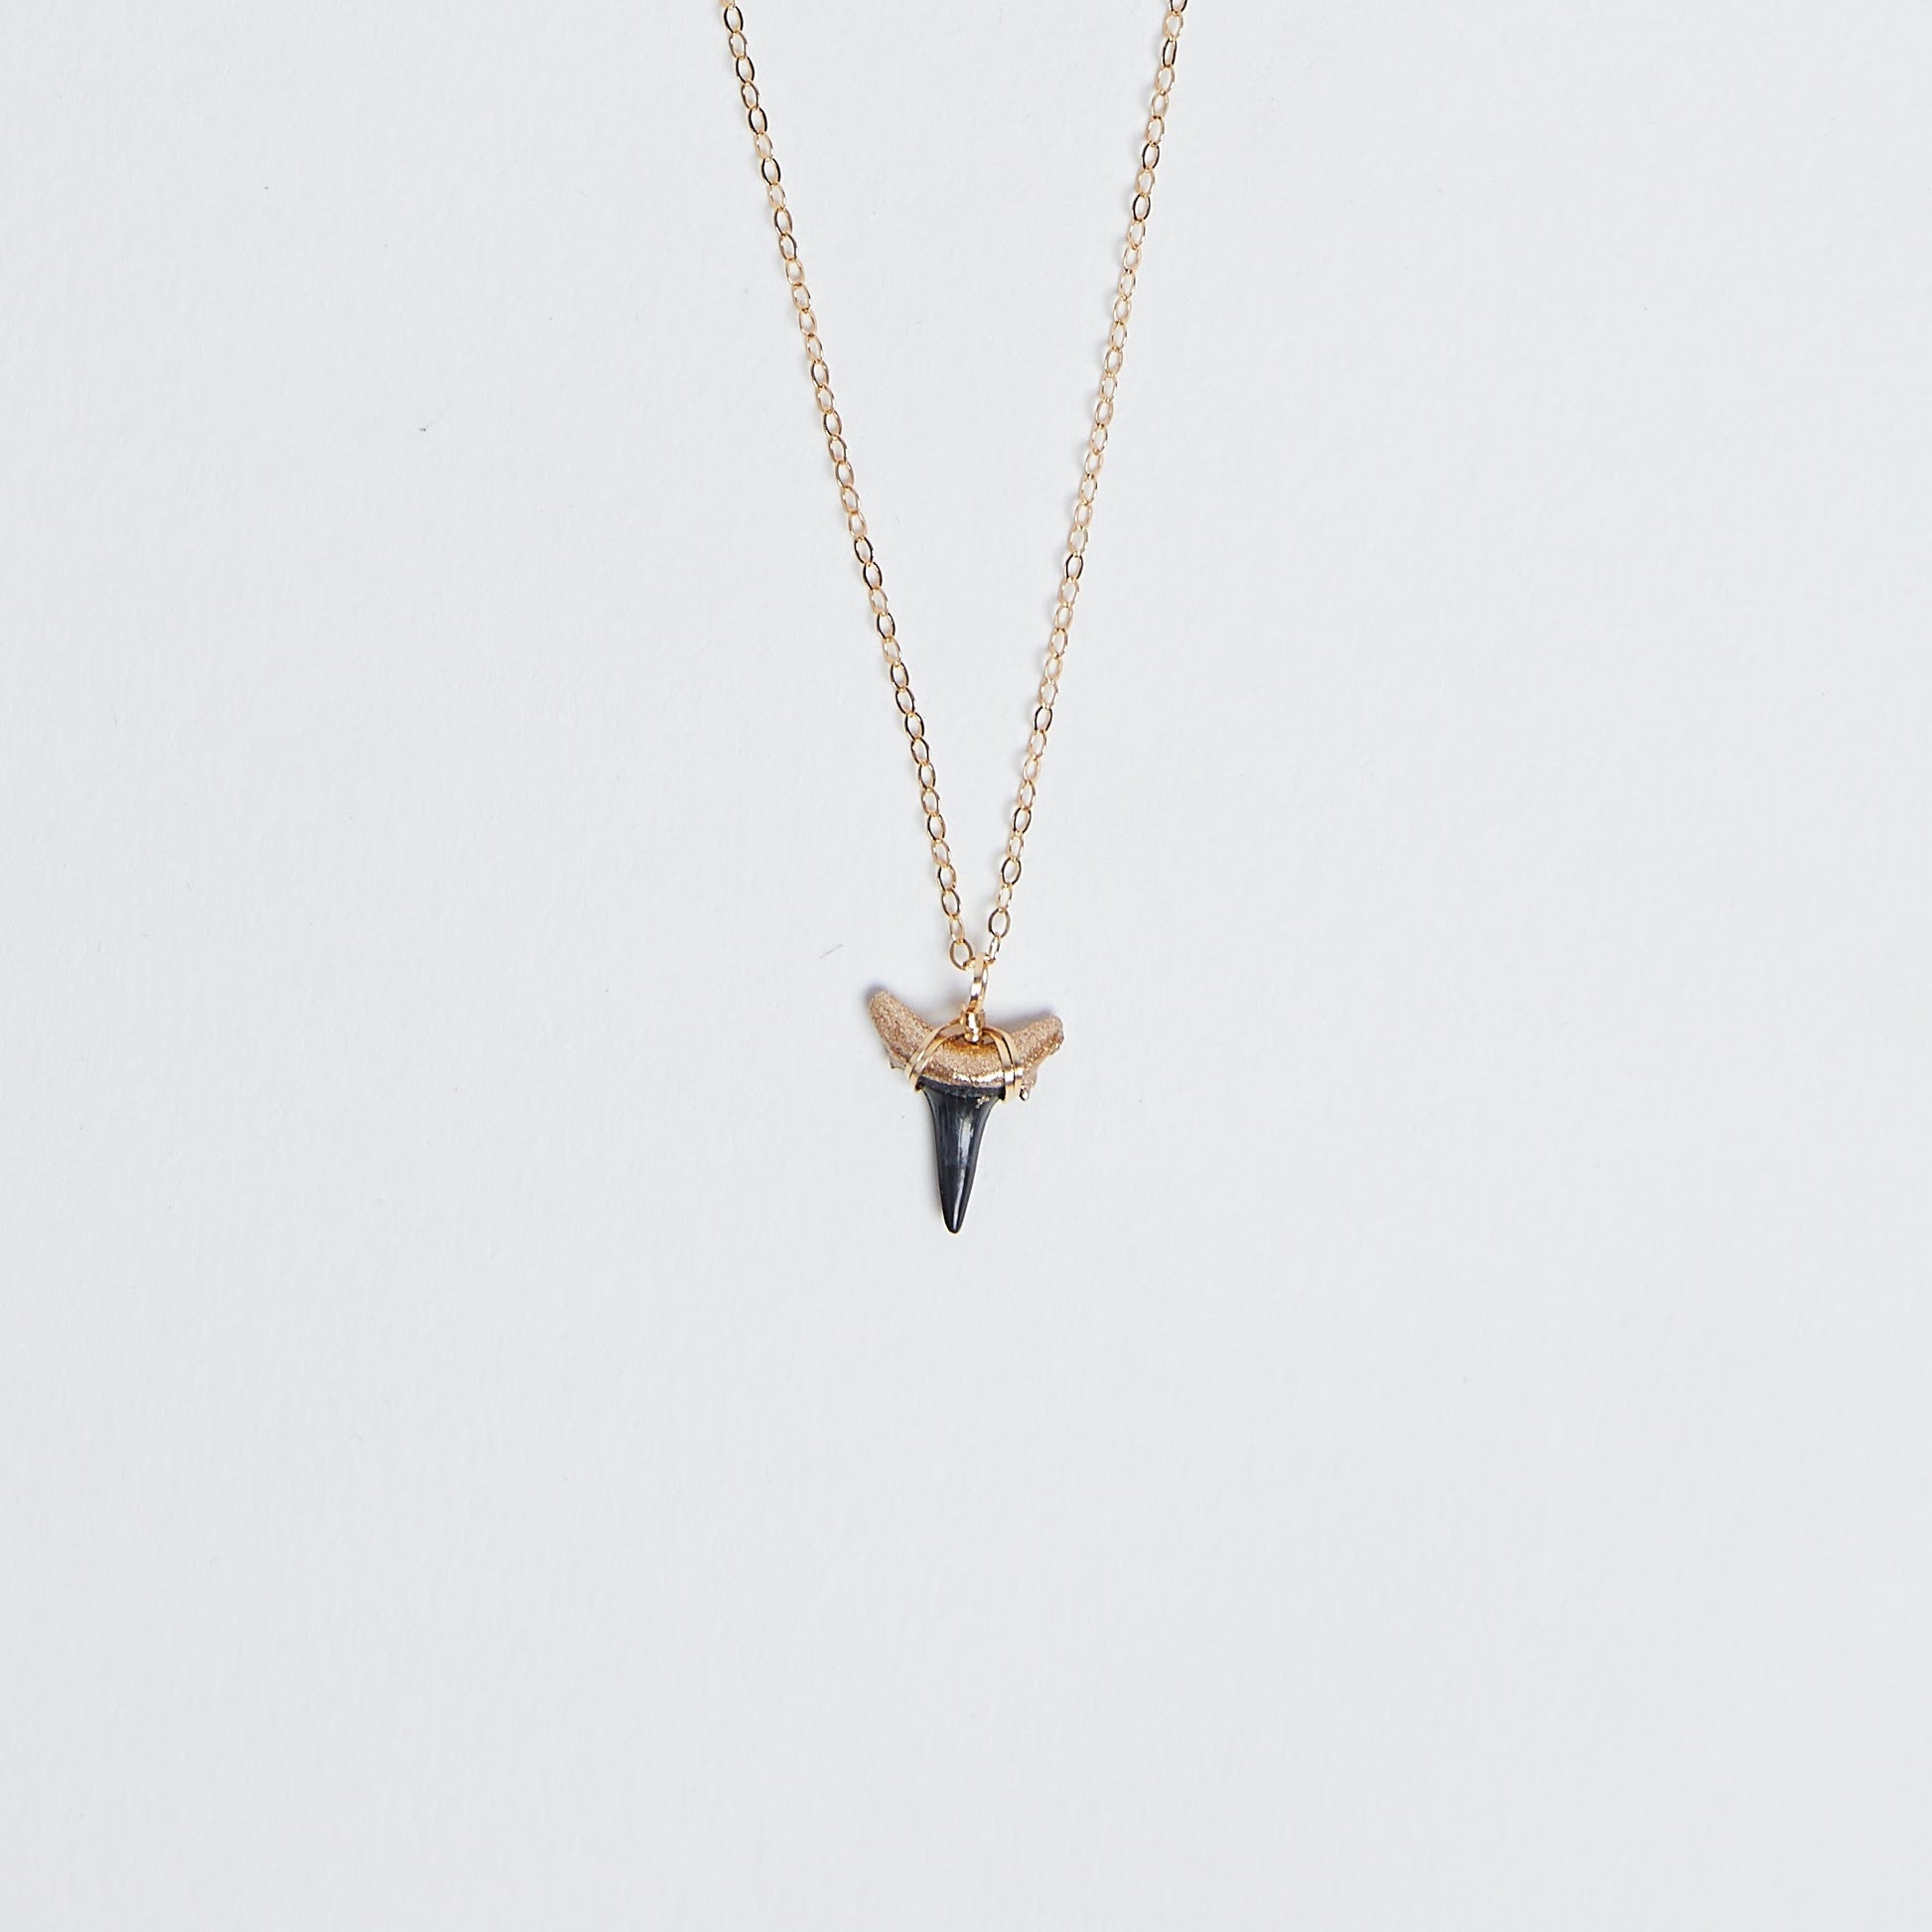 Gold-Tip Shark Tooth Necklace real fossilized prehistoric shark tooth pendant wire wrapped with gold - Foxy Fossils